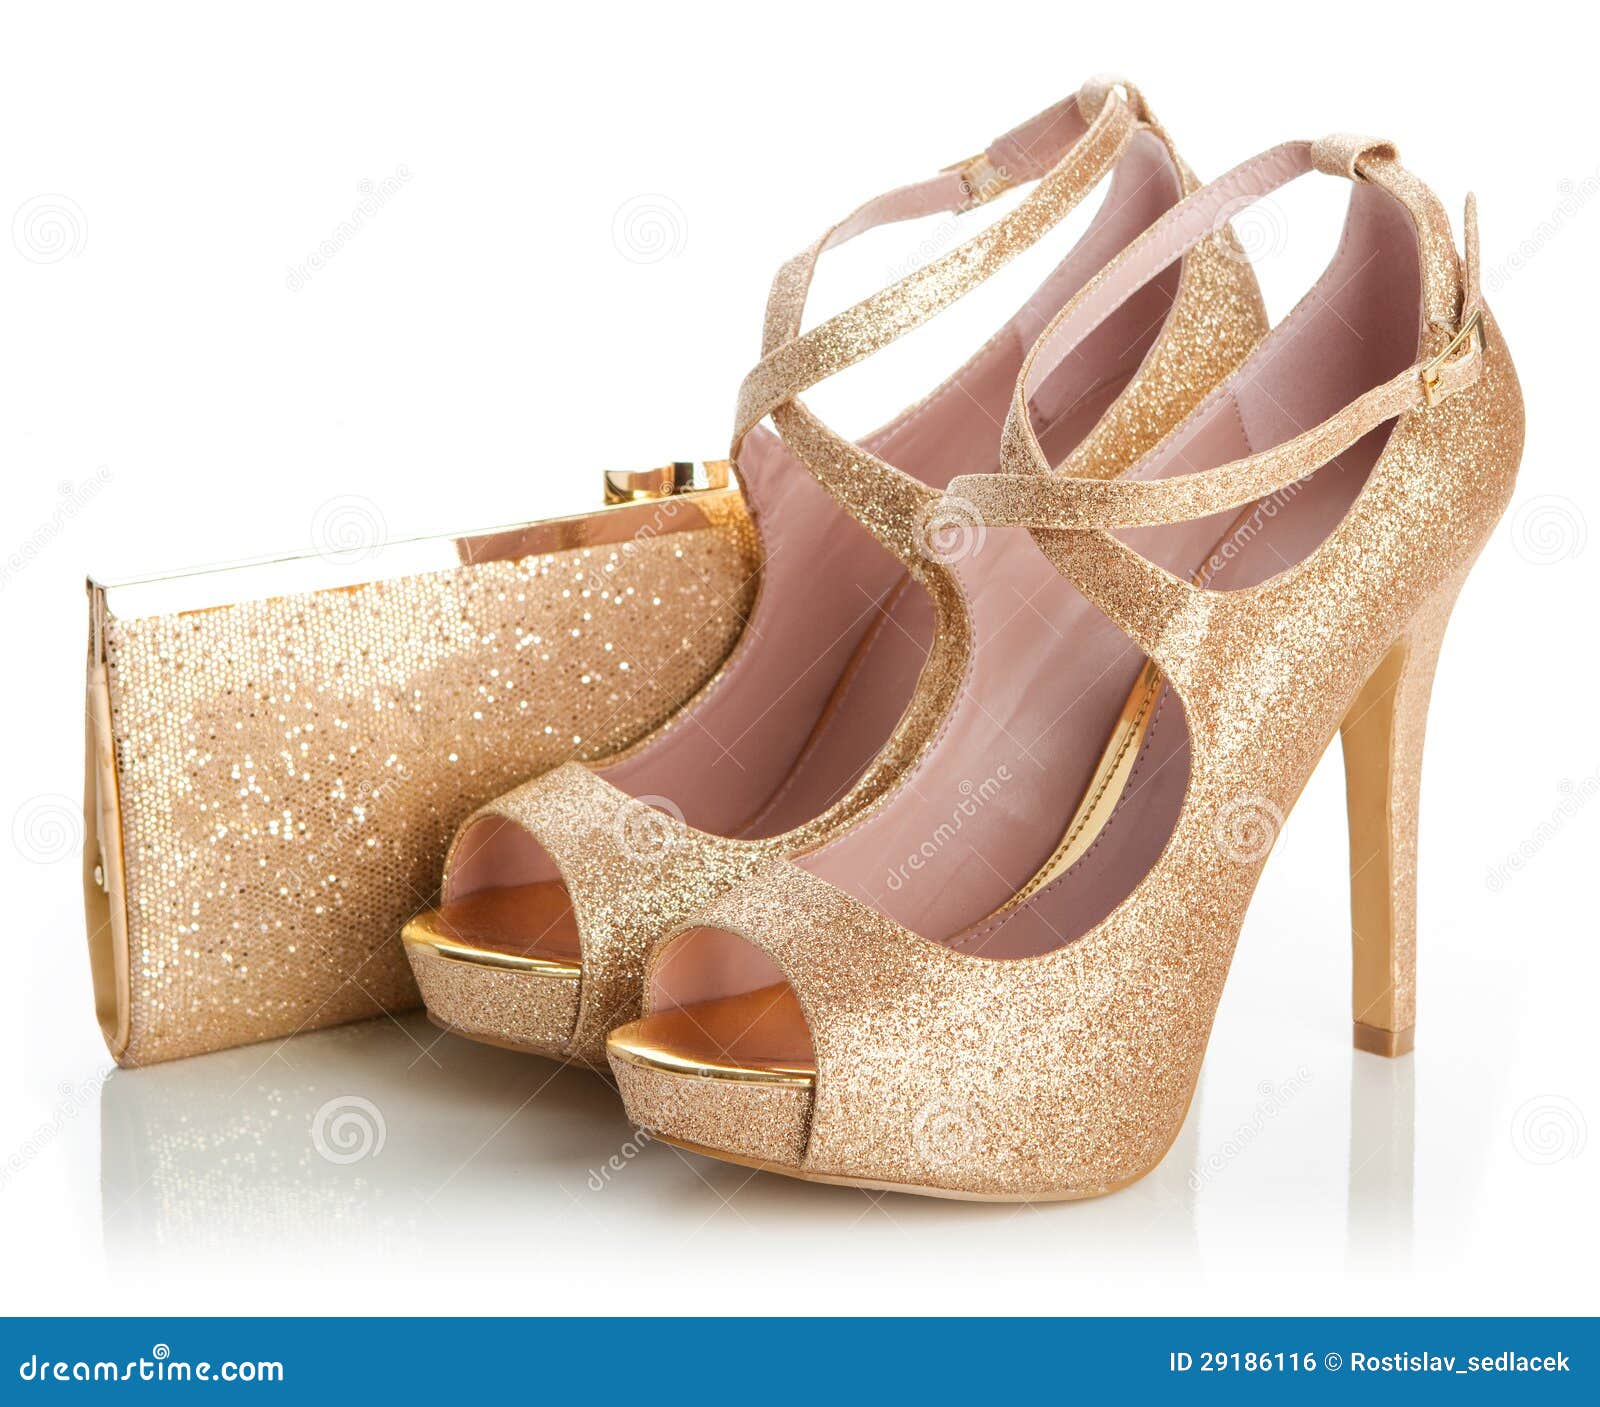 Ladies Gold Shoes And Bag Royalty Free Stock Image - Image: 29186116